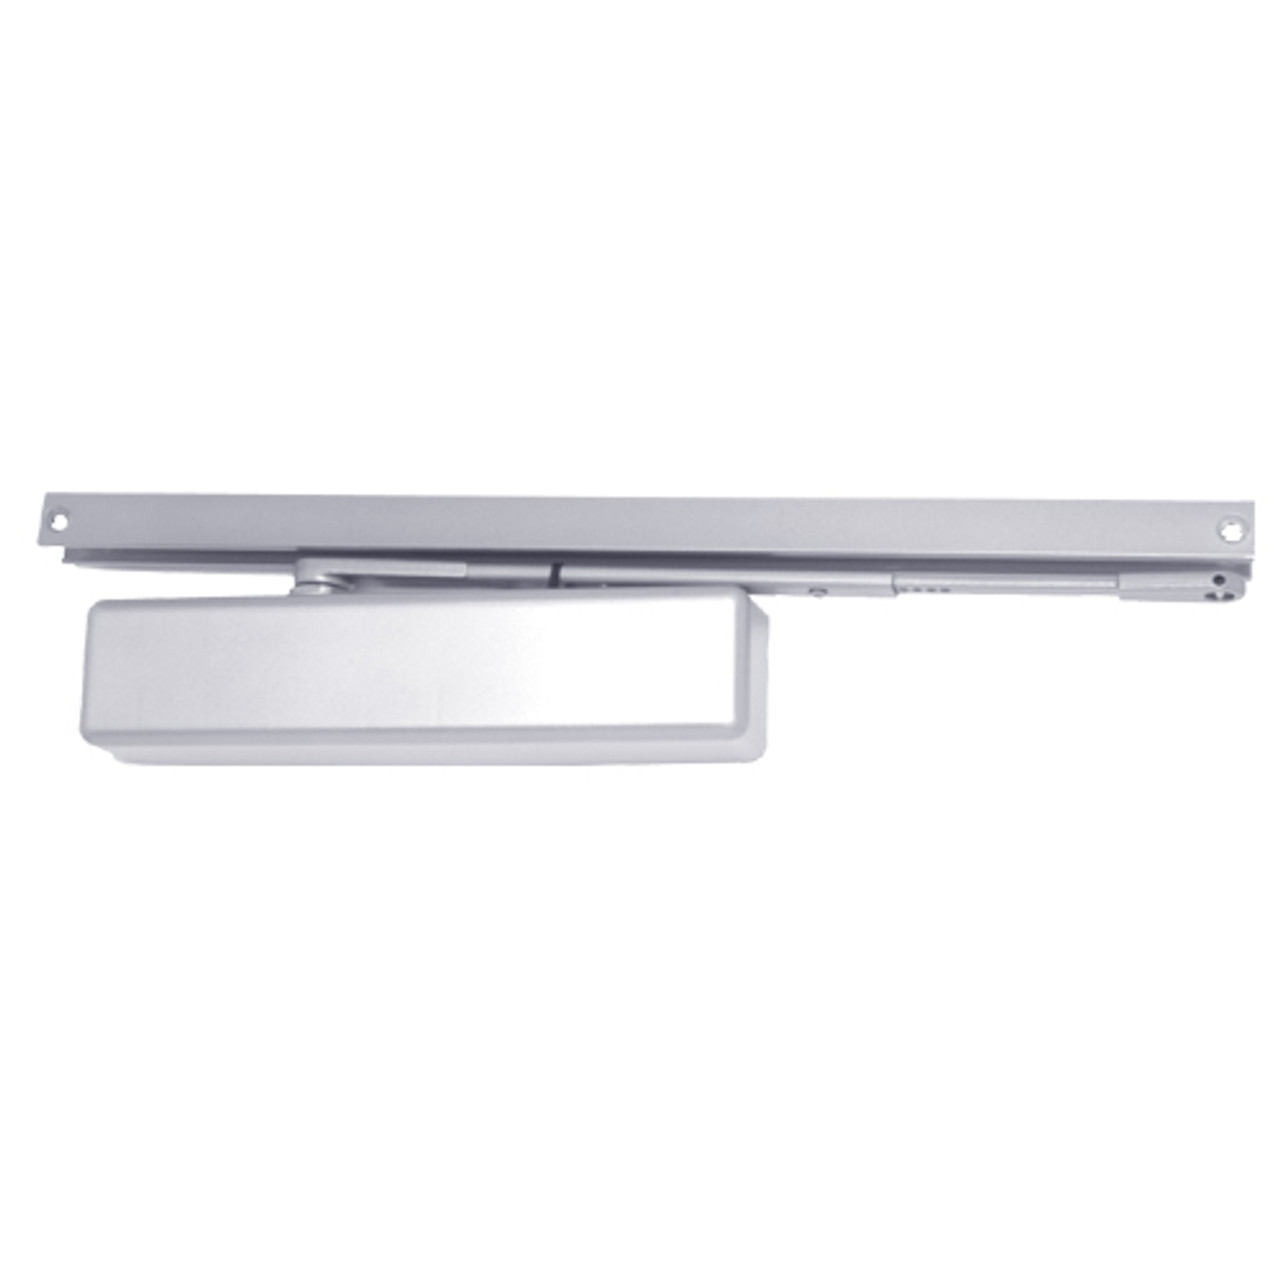 1460T-H-US26 LCN Surface Mount Door Closer with Hold Open Arm in Bright Chrome Finish